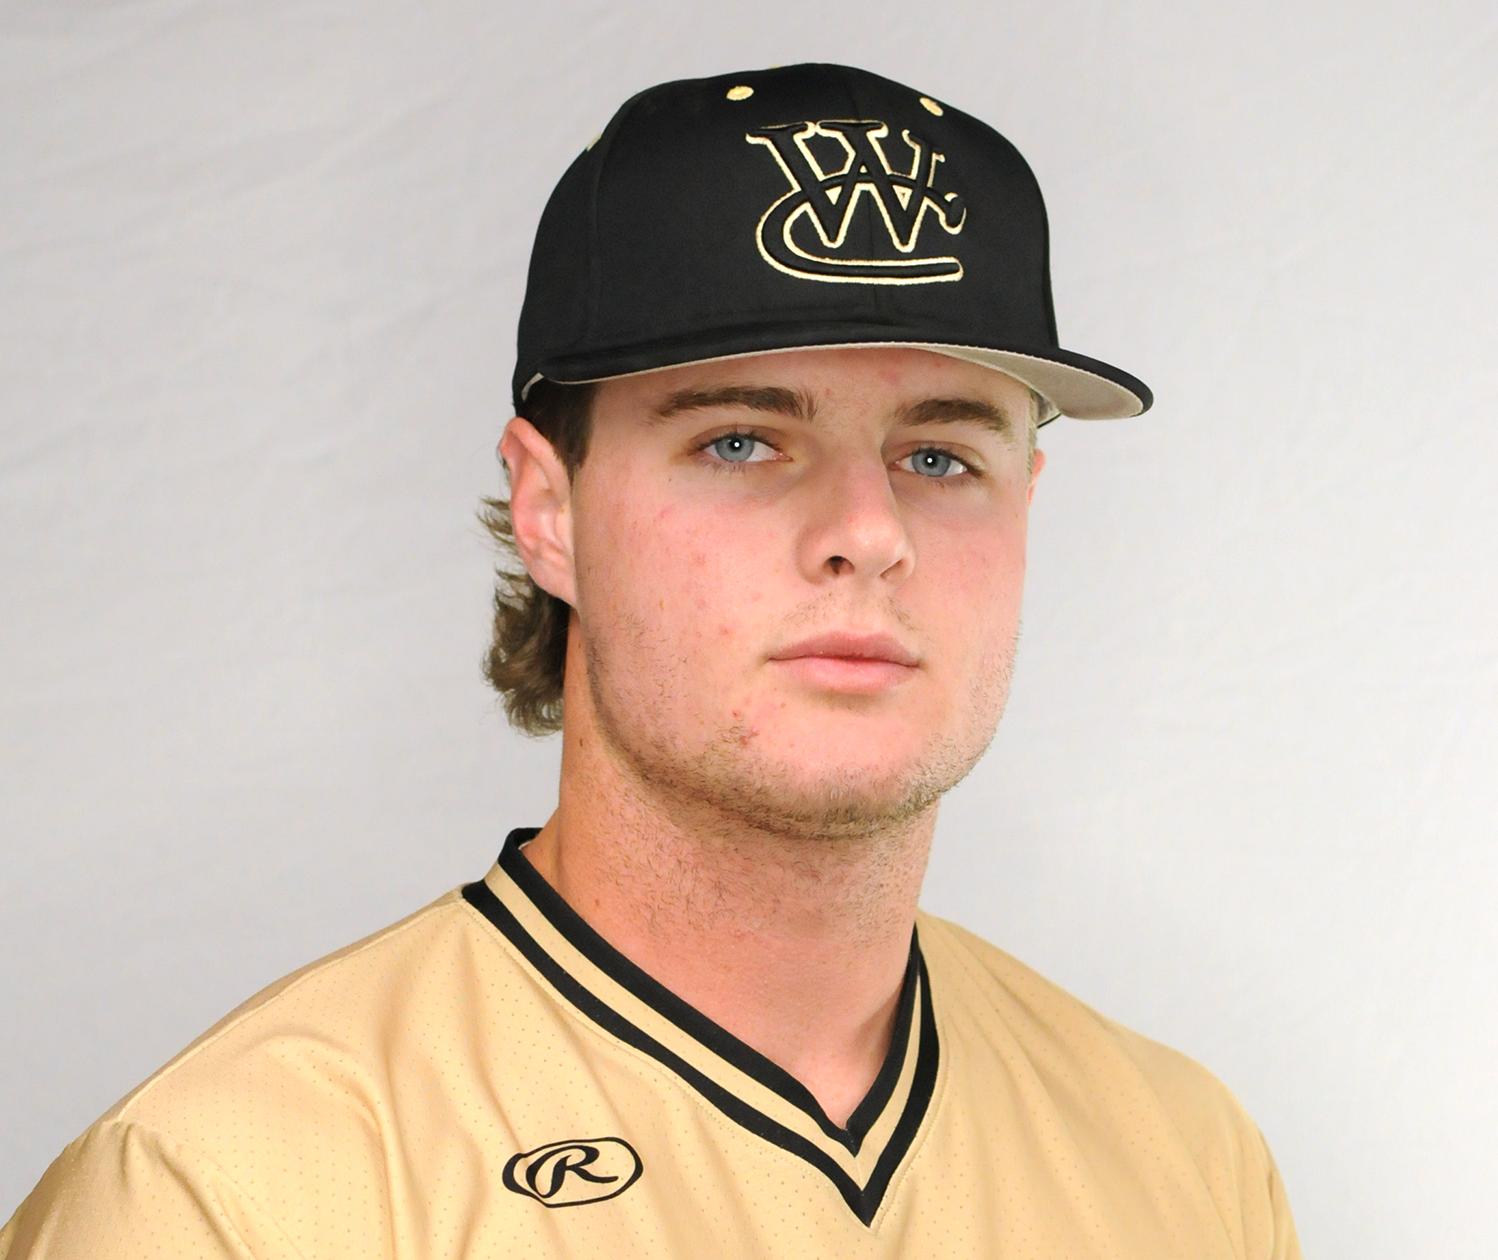 Mets select WC alum Woodward in MLB Draft